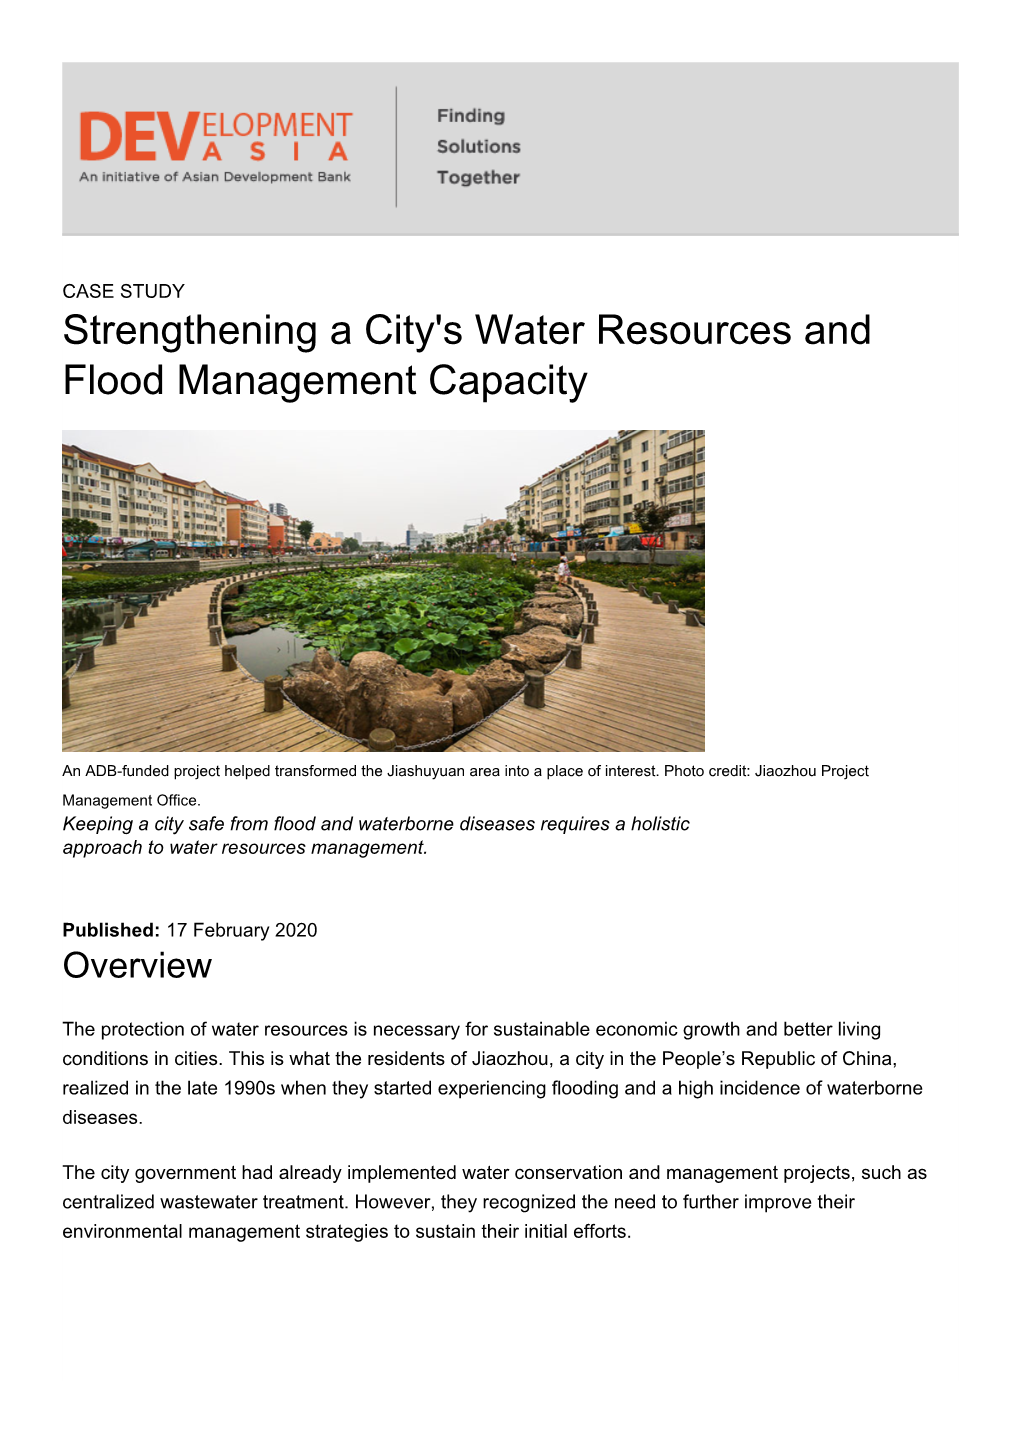 Strengthening a City's Water Resources and Flood Management Capacity